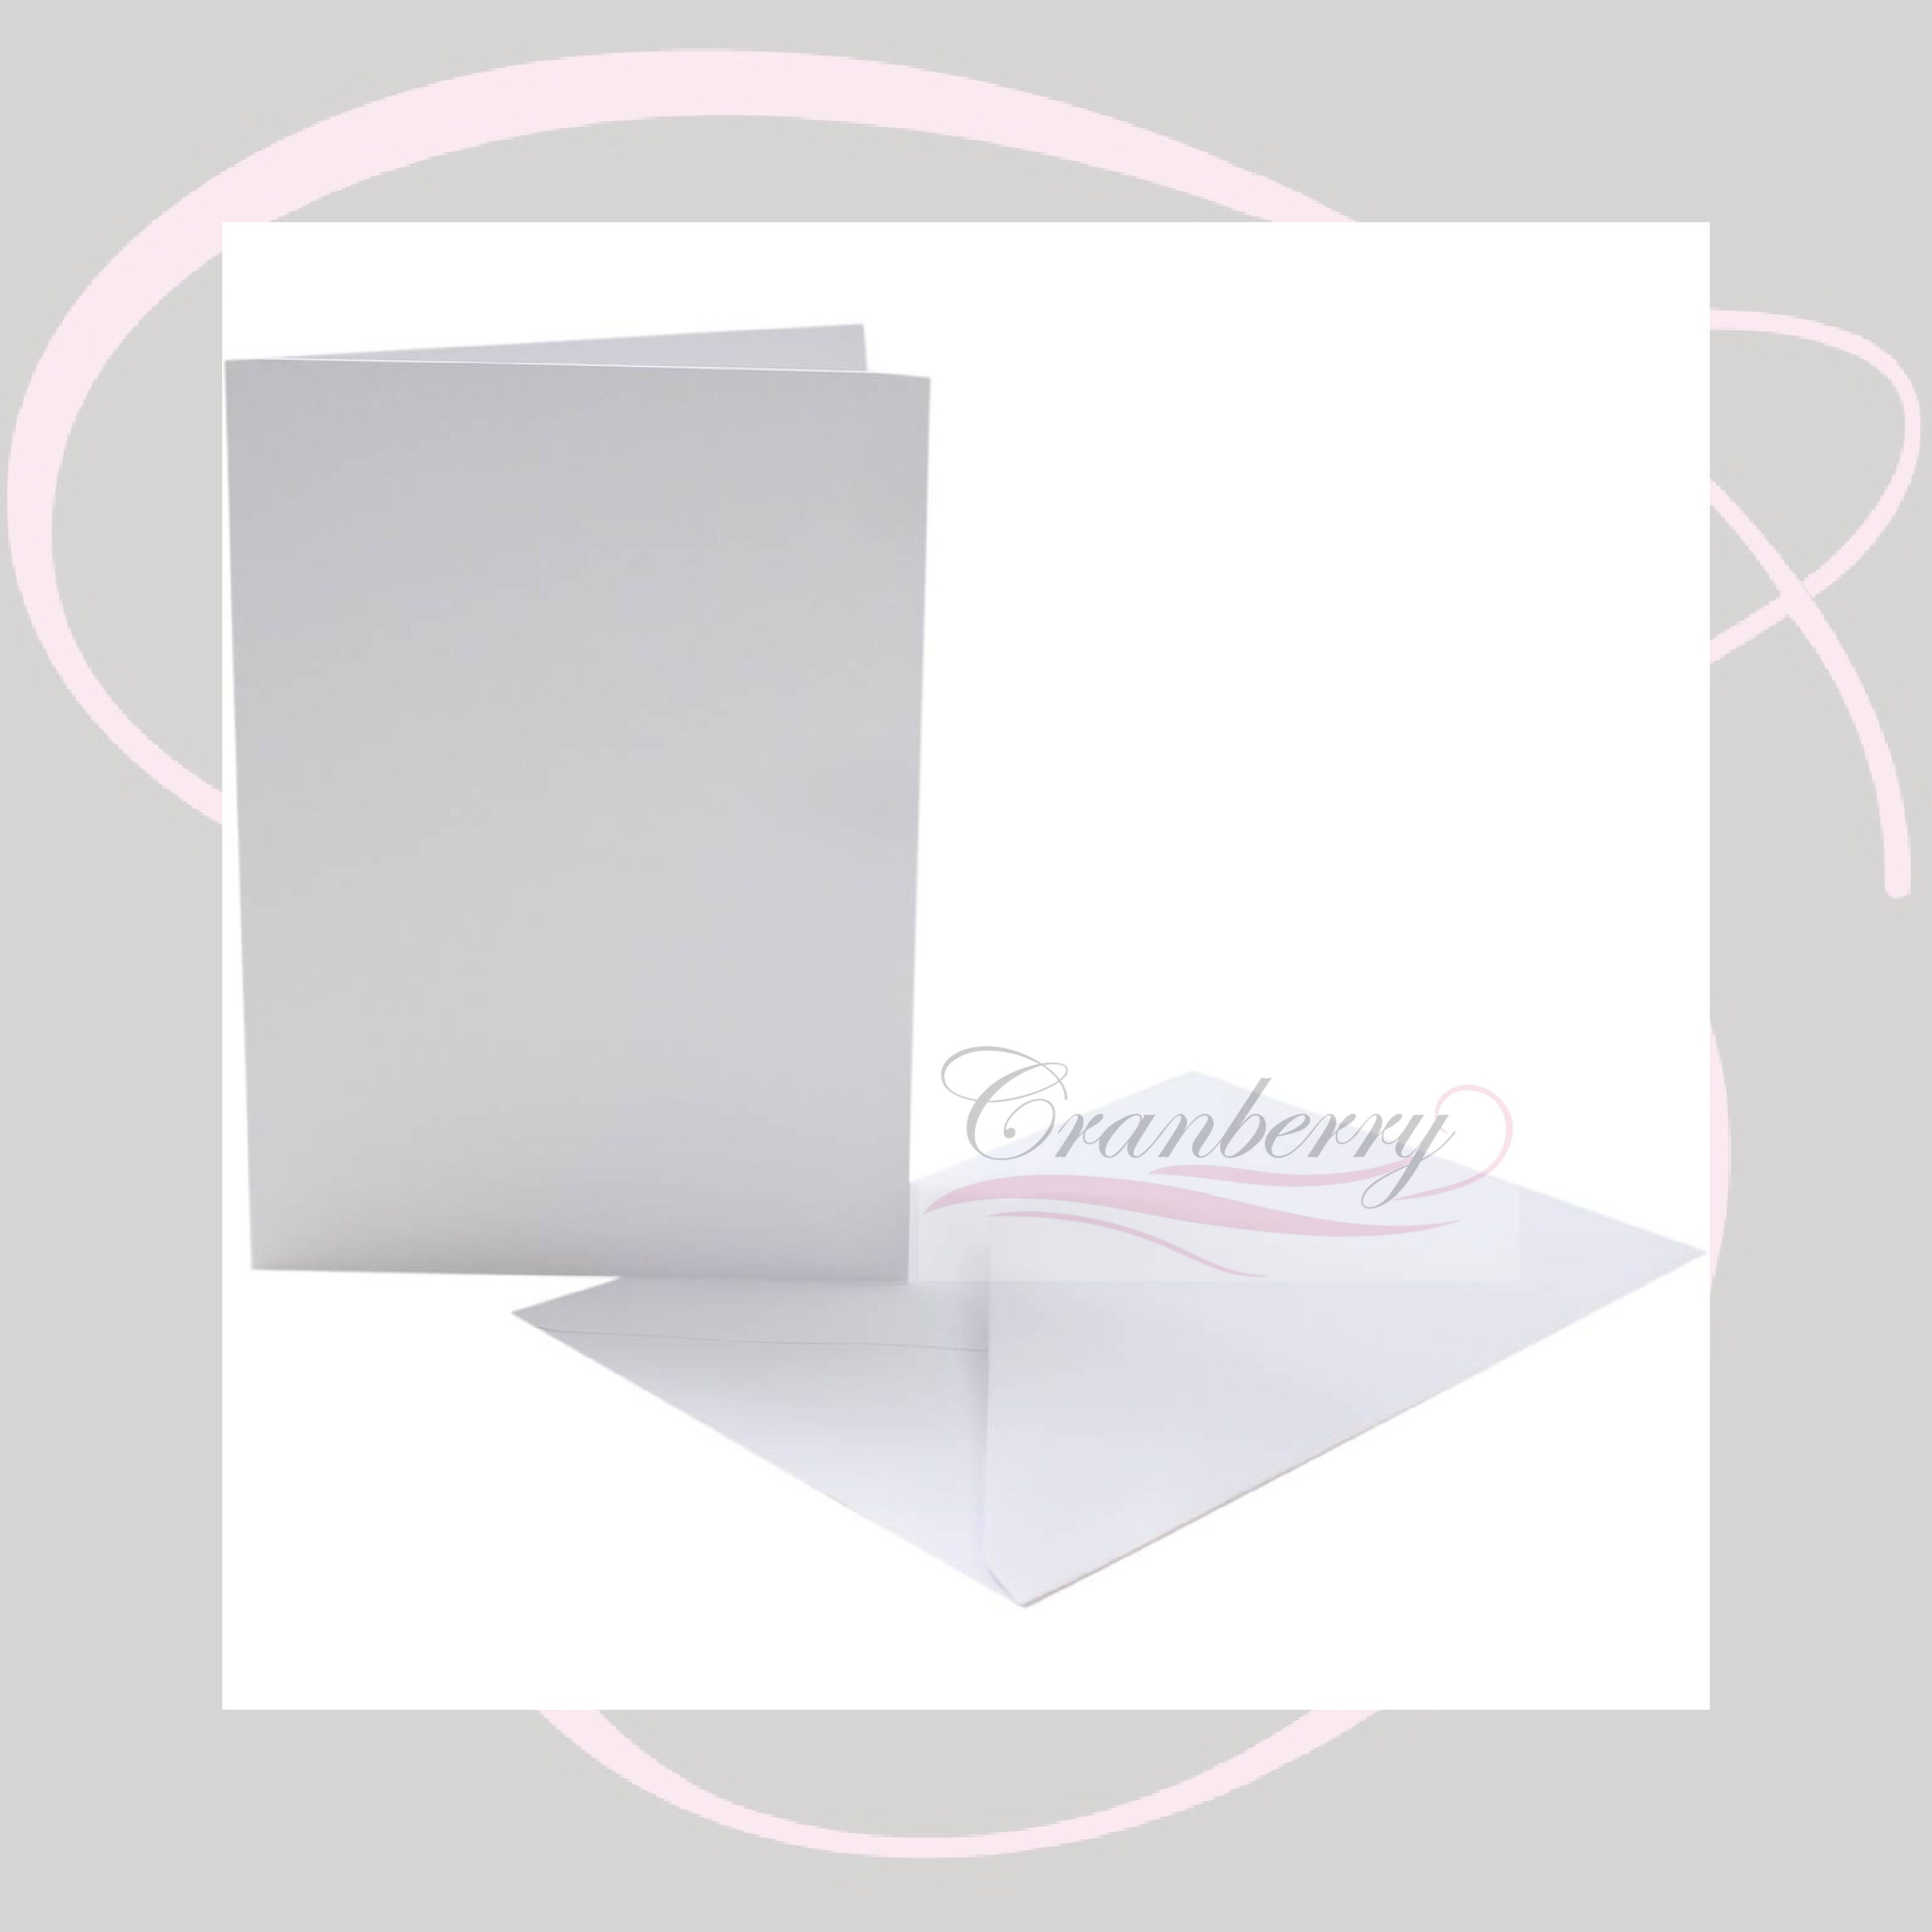 Blank White Cards and Envelopes, Printable, Perfect for Arts and